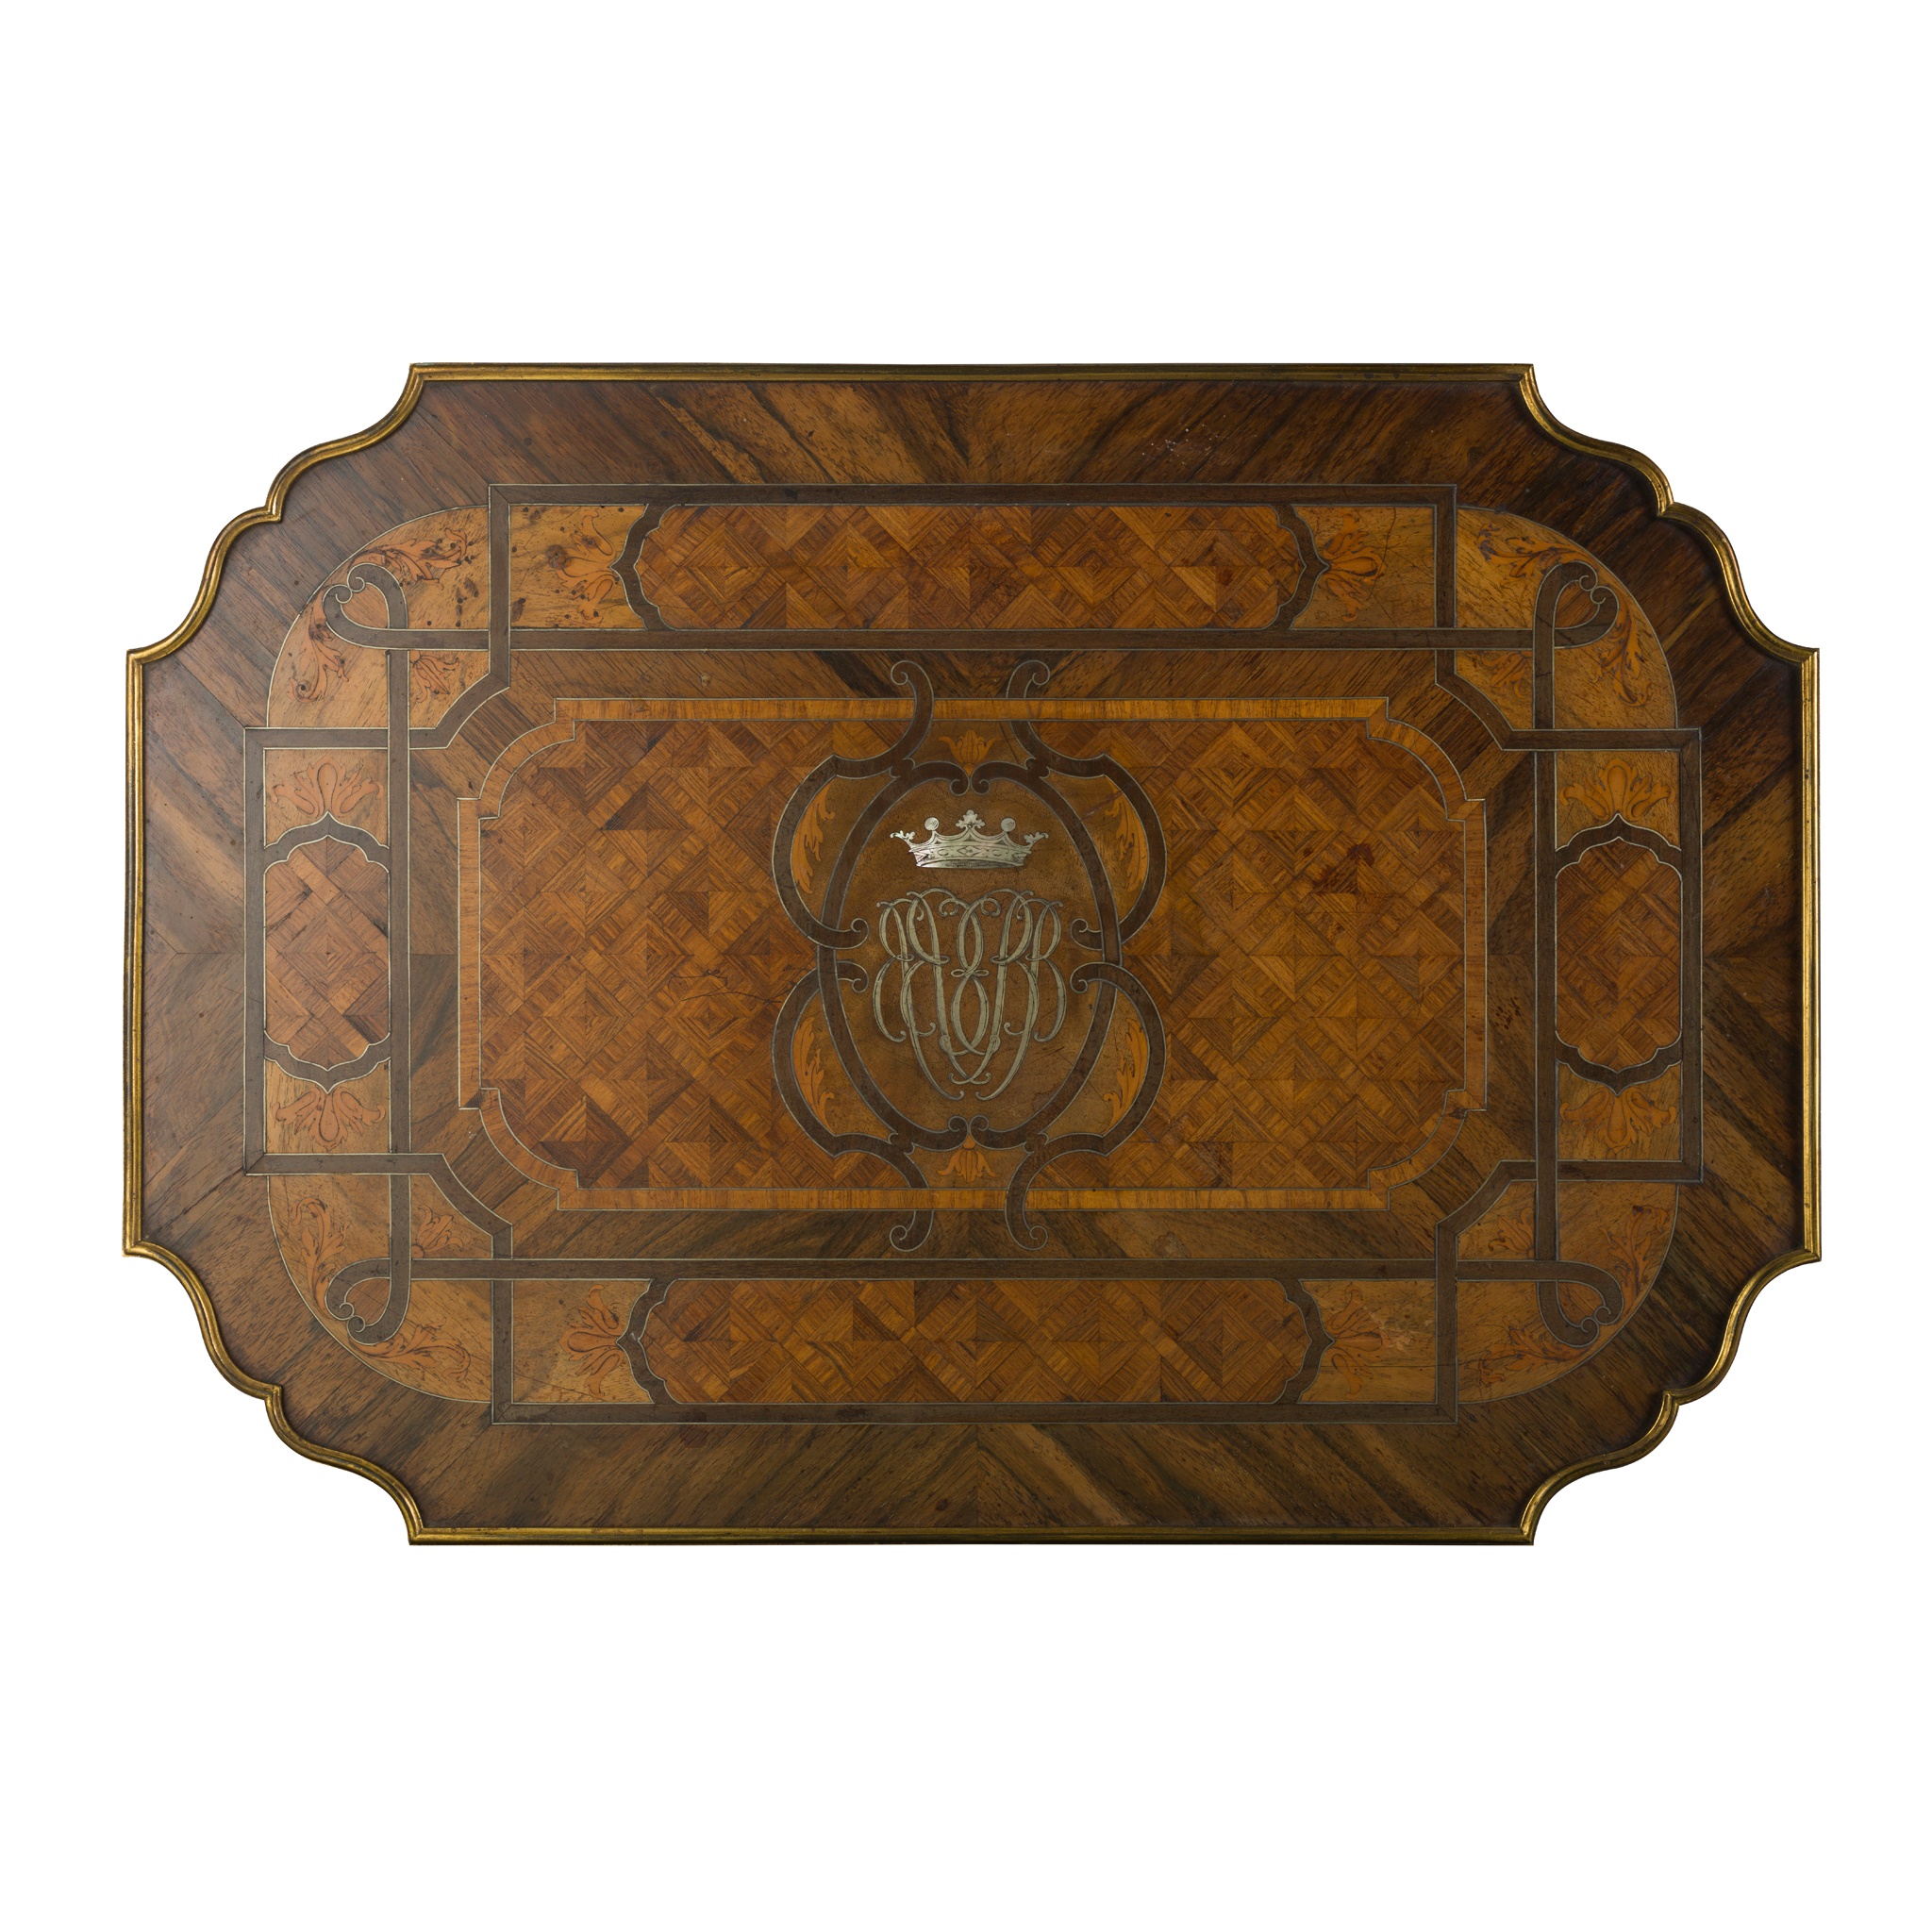 PAIR OF ROSEWOOD MARQUETRY, MOTHER-OF-PEARL, SILVER METAL, AND BRASS BANDED OCCASIONAL TABLES CIRCA - Image 2 of 3